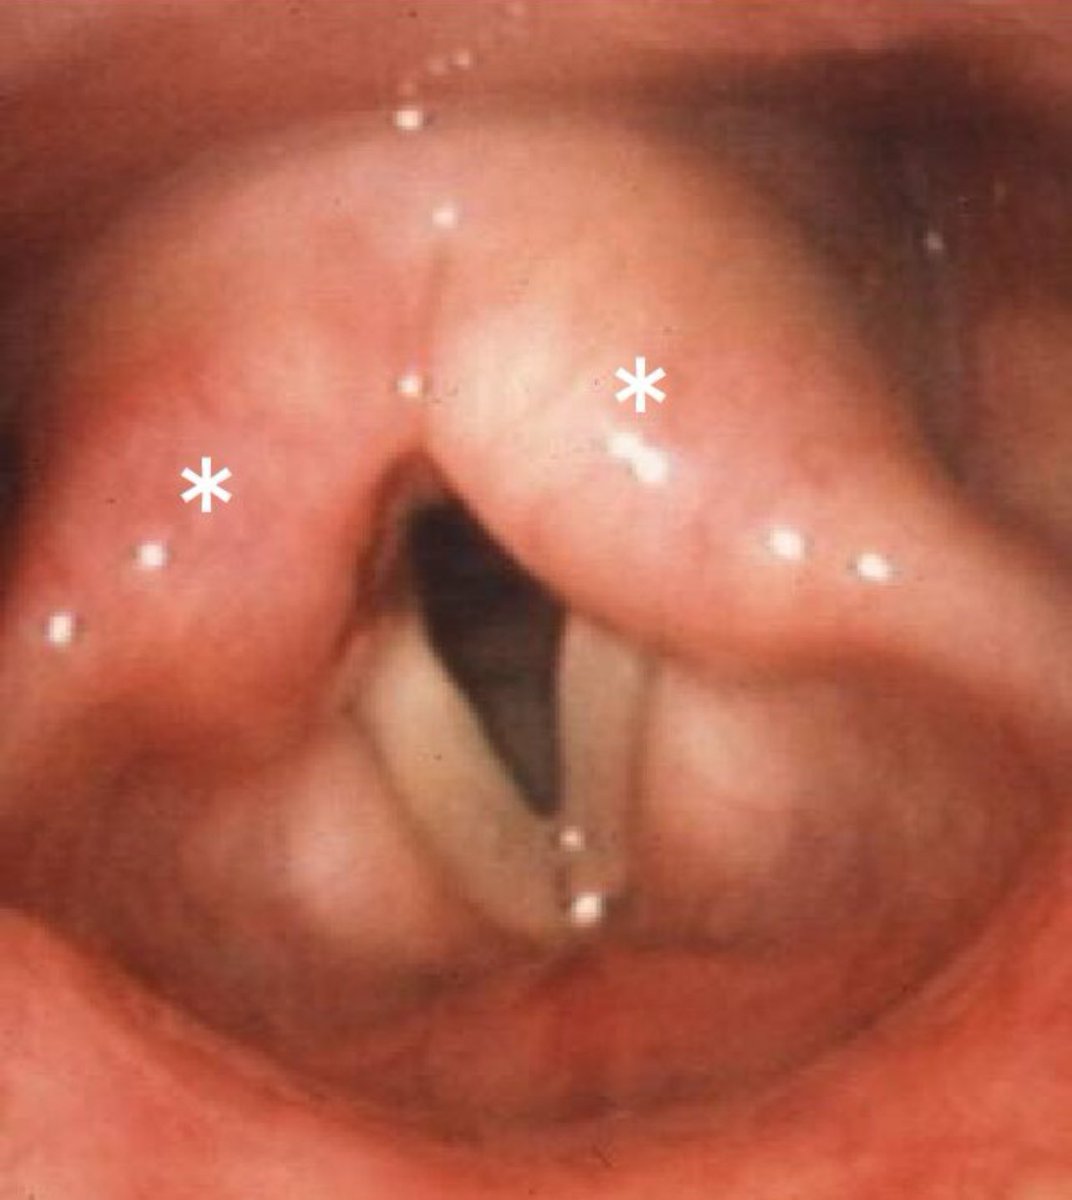 Laryngeal edema in a patient of #anaphylaxis!

#MedX
#MedTwitter
#NEETPG2024

What are other causes of laryngeal edema?